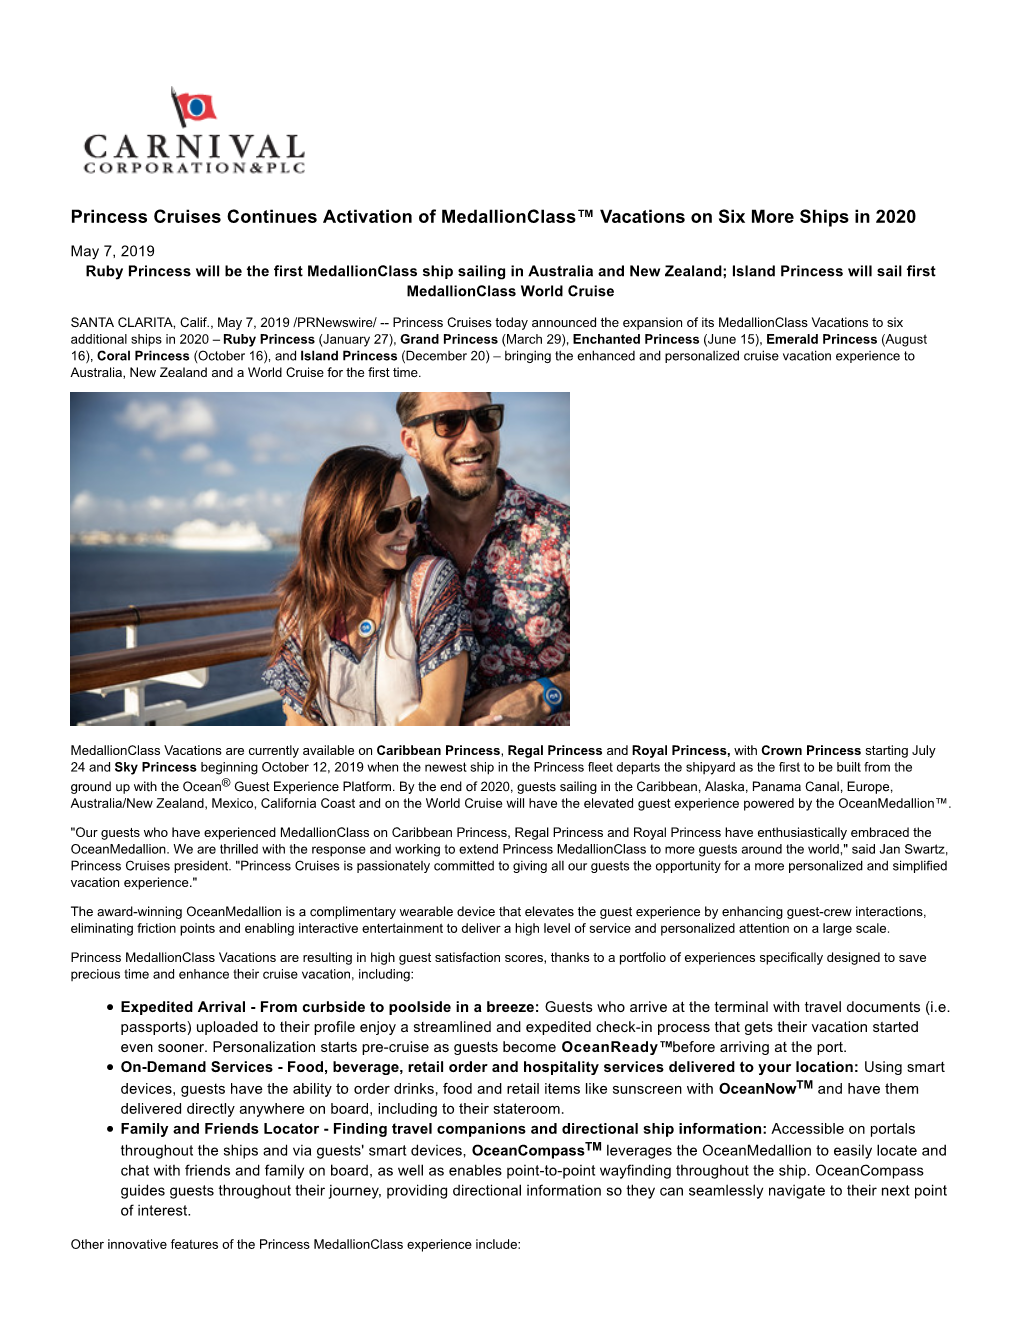 Princess Cruises Continues Activation of Medallionclass™ Vacations on Six More Ships in 2020